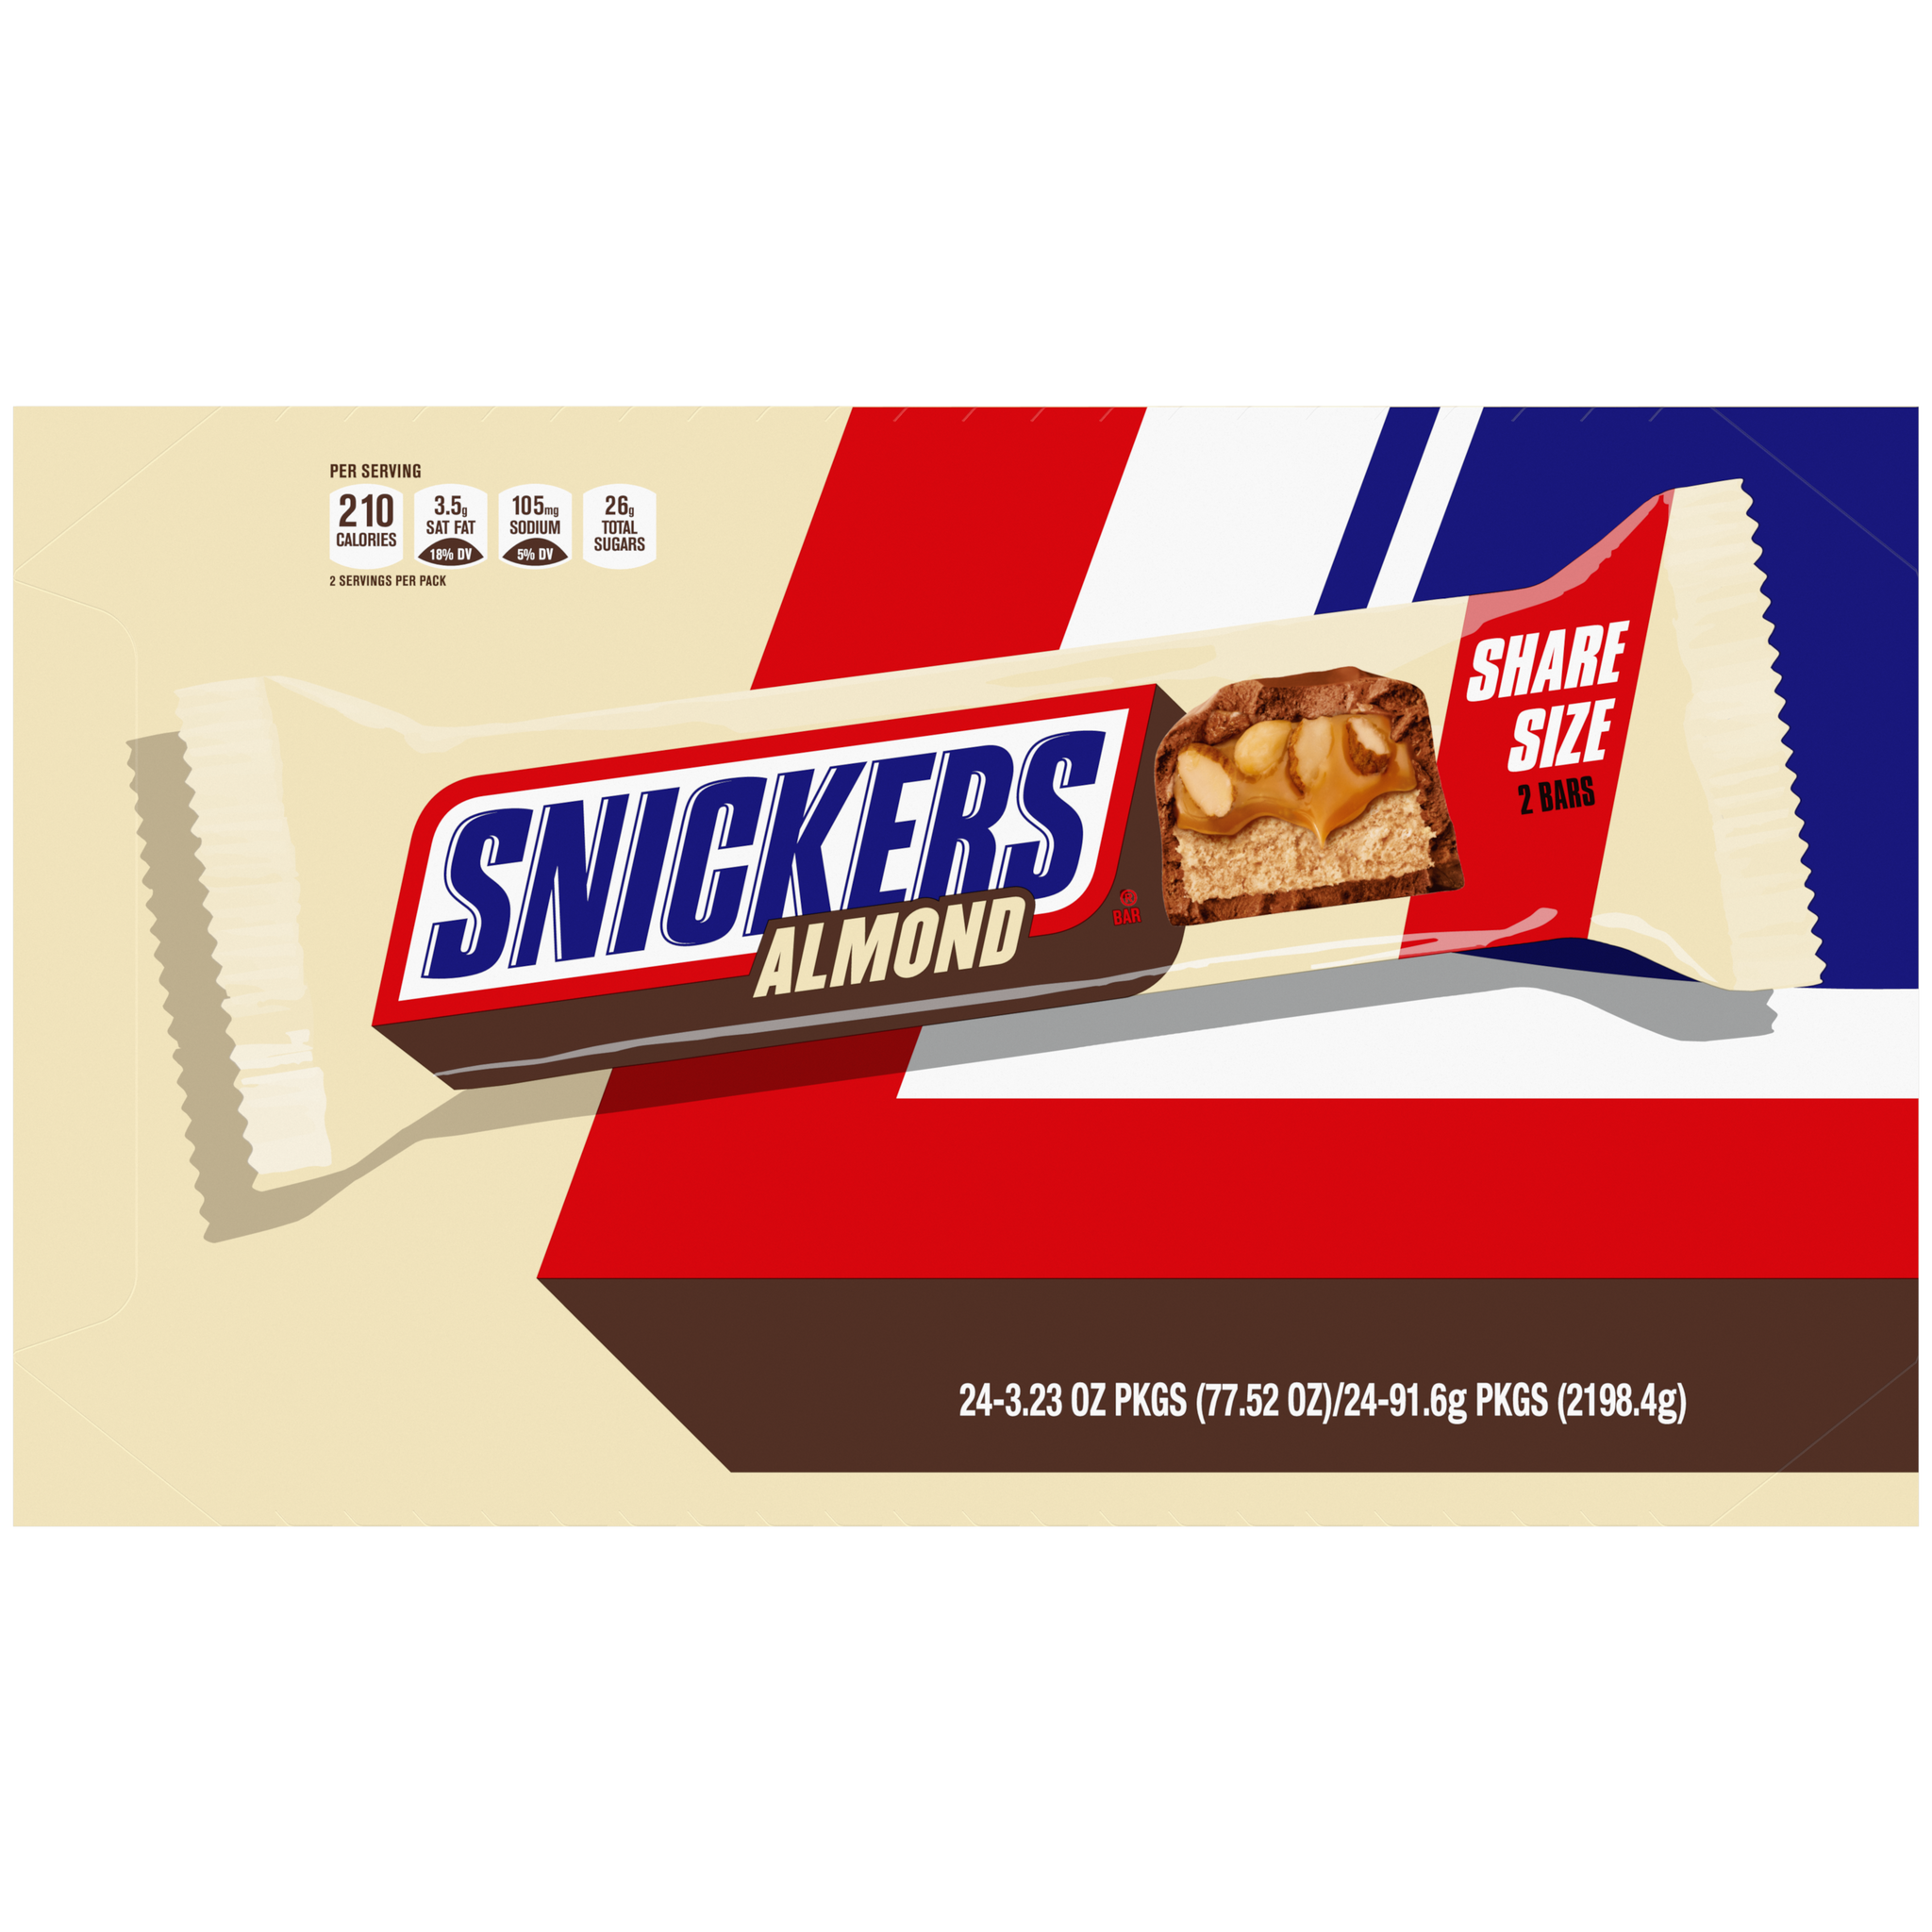 Snickers Fun Size Candy Bars 18-Piece Bag